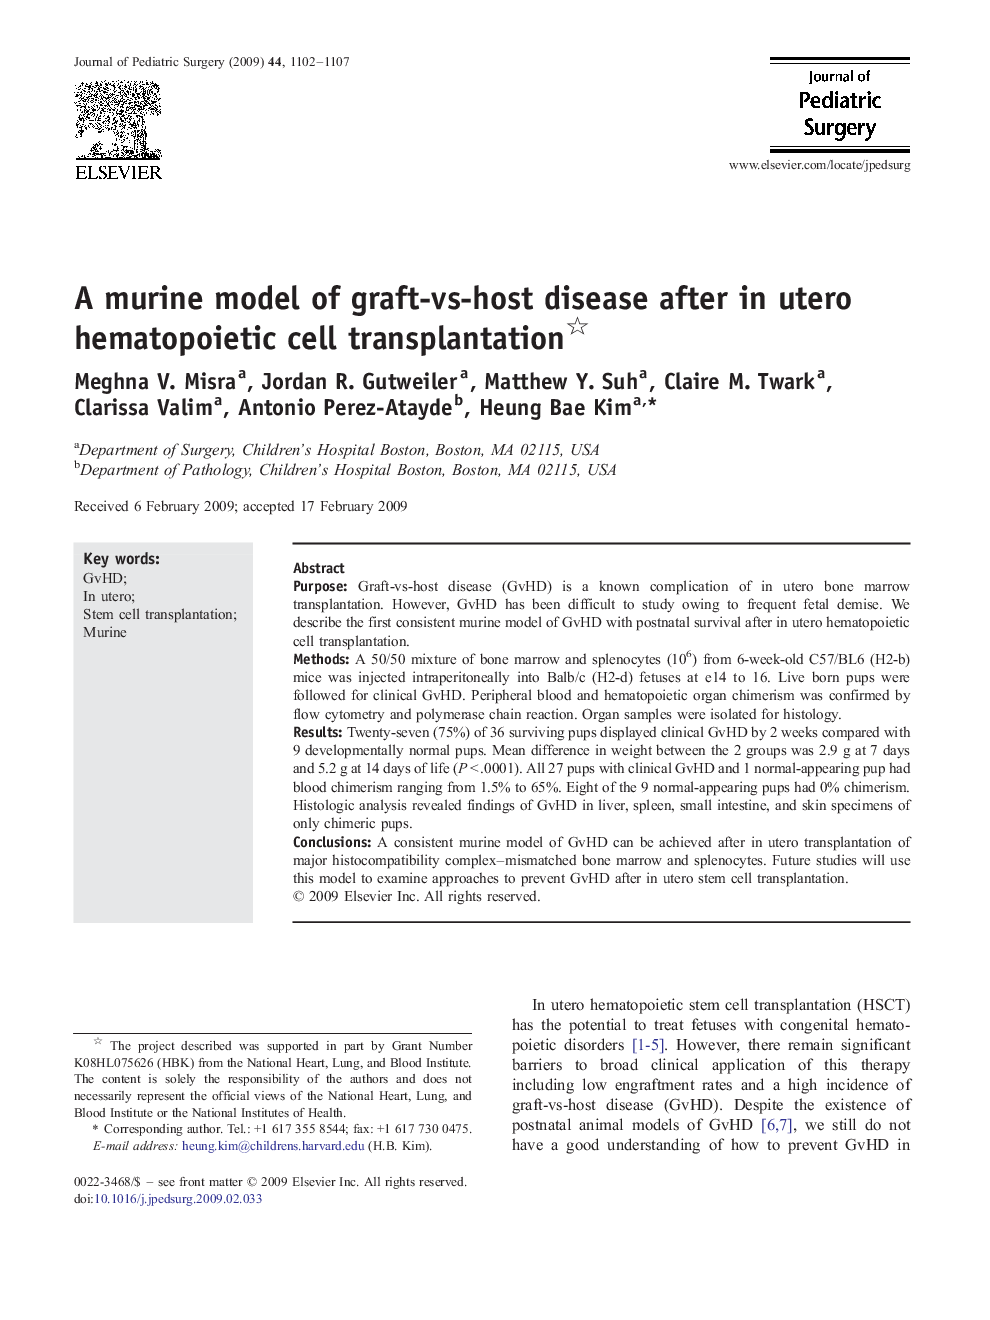 A murine model of graft-vs-host disease after in utero hematopoietic cell transplantation 